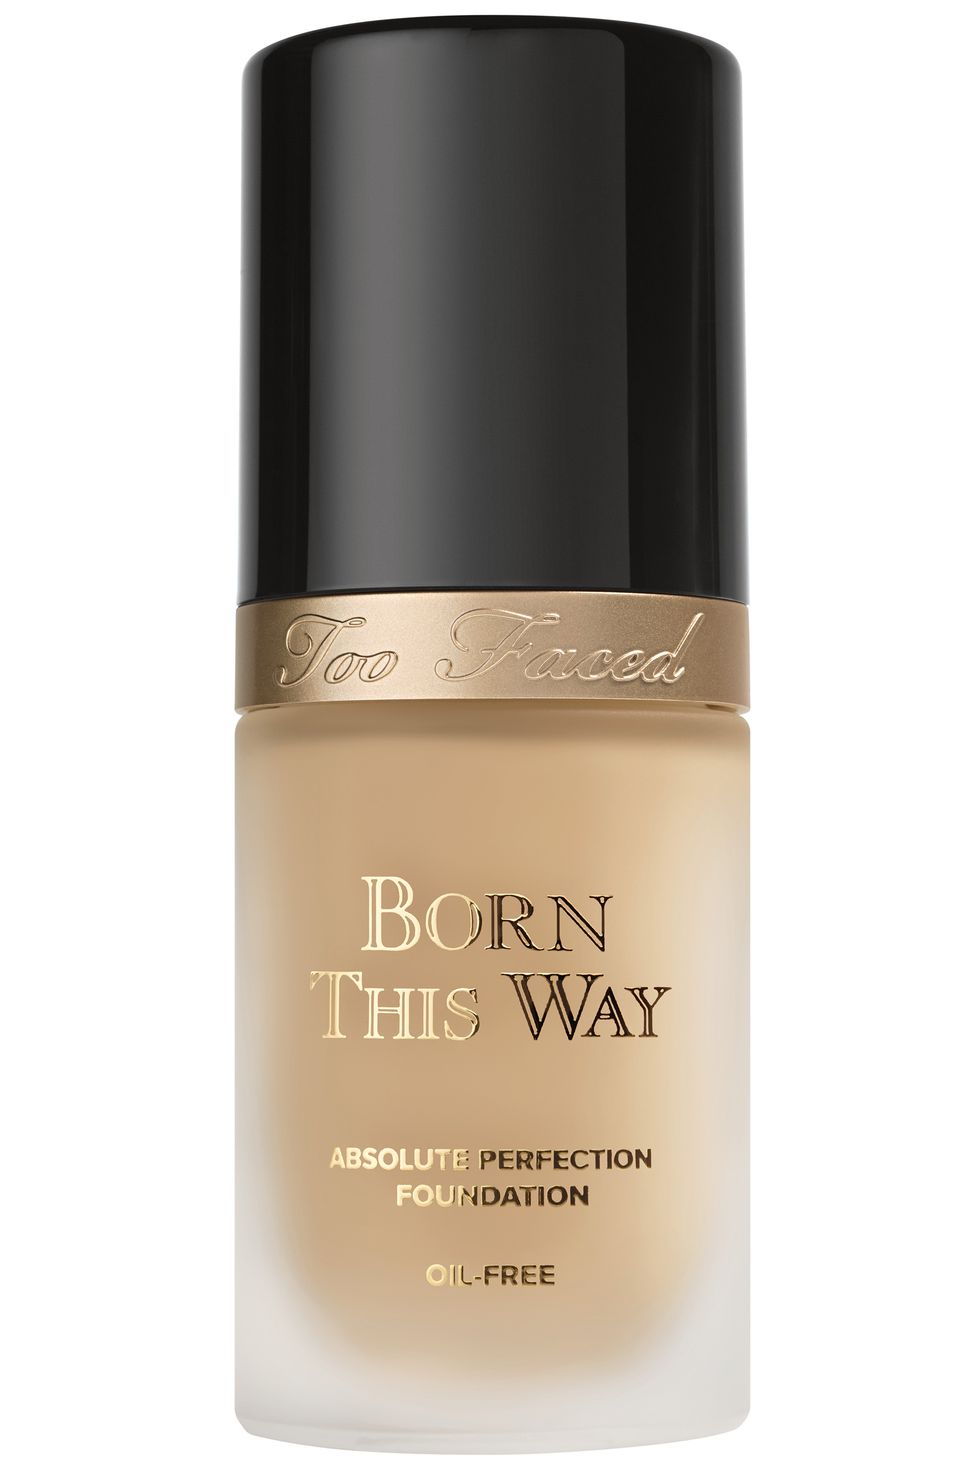 <p>Coconut water and hyaluronic acid keep skin moisturized and smooth in the moment and long-term.</p><p><strong>Too Faced </strong>Born This Way Absolute Perfection Foundation, $39, <a href="http://www.ulta.com/ulta/browse/productDetail.jsp?productId=xlsImpprod12621017" target="_blank">ulta.com</a>.</p>